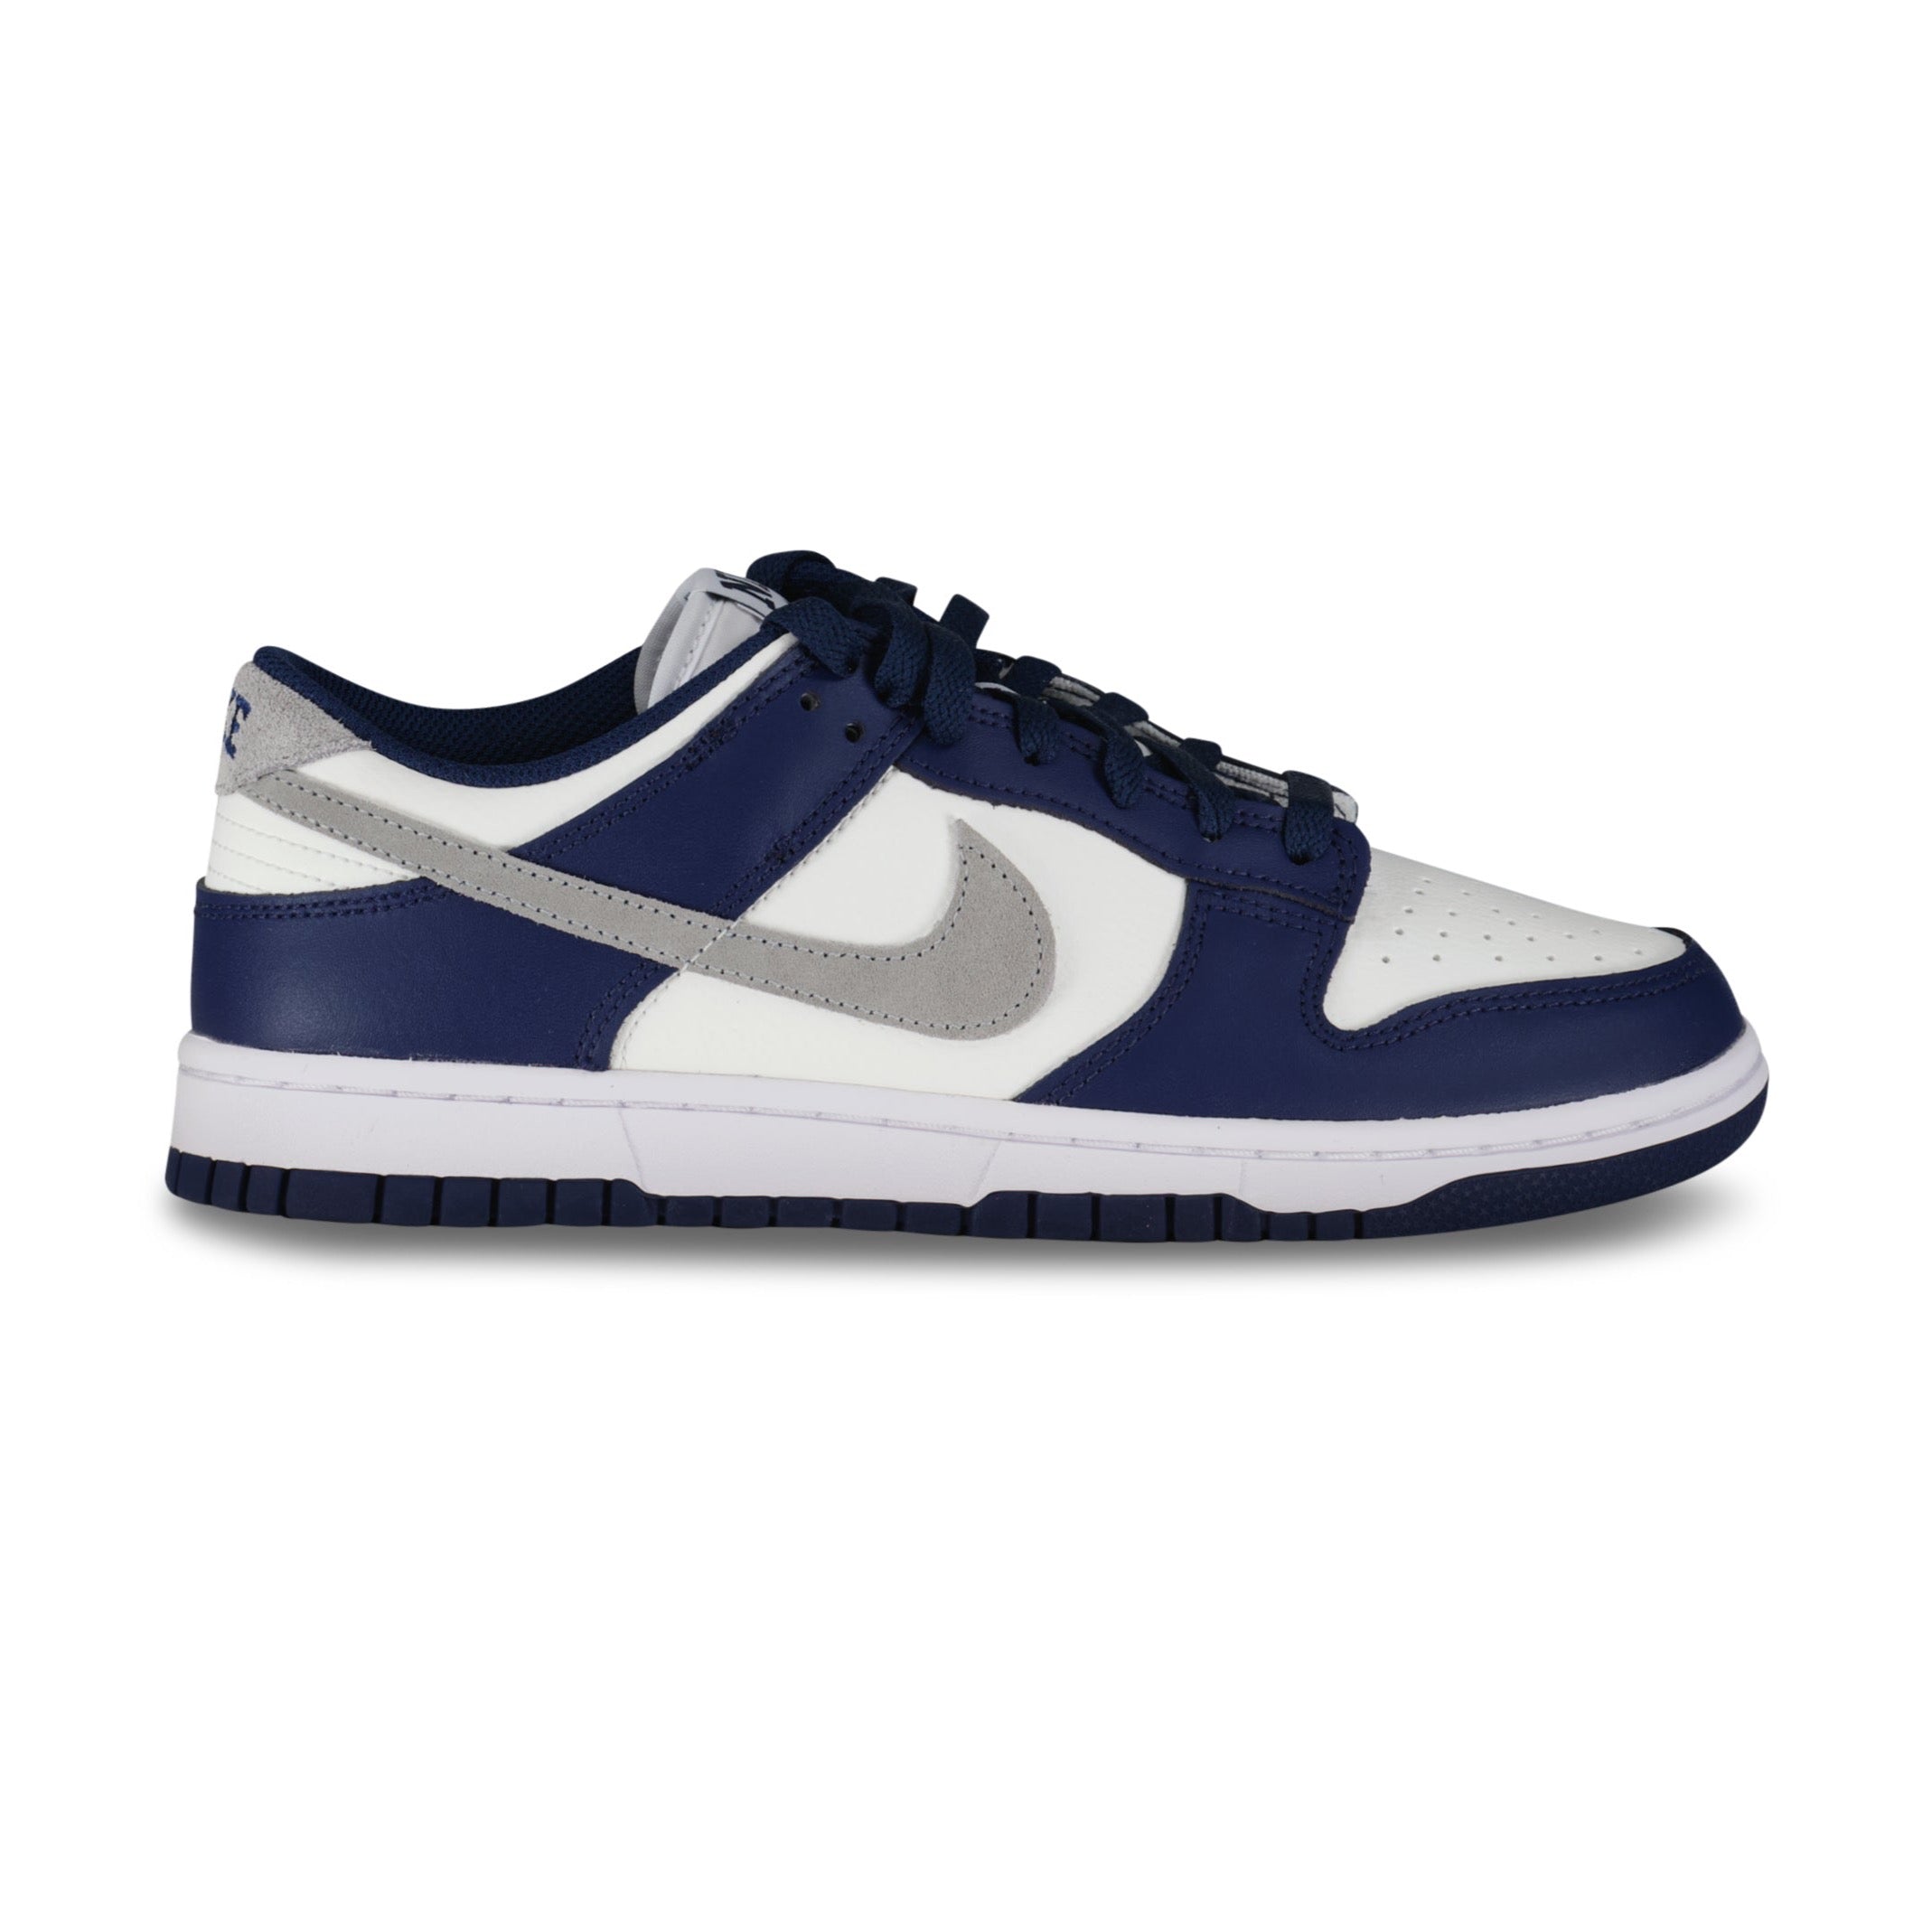 NIKE DUNK LOW 'MIDNIGHT BLUE' TRAINERS